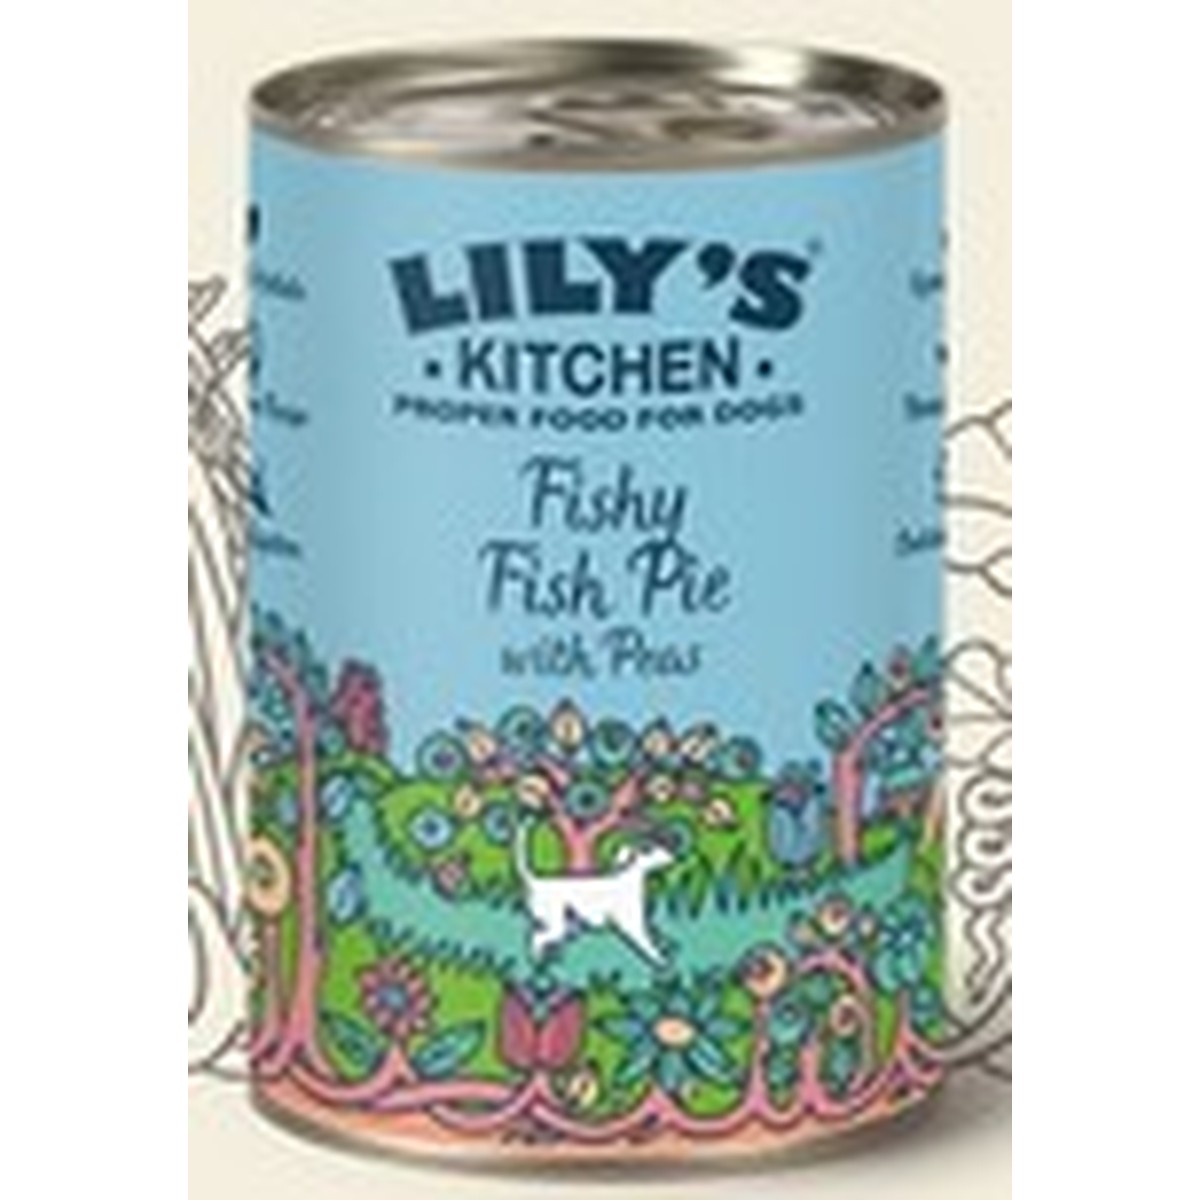 Lily's  Lily's dog Adult Fish Pie Peas 400g  400g